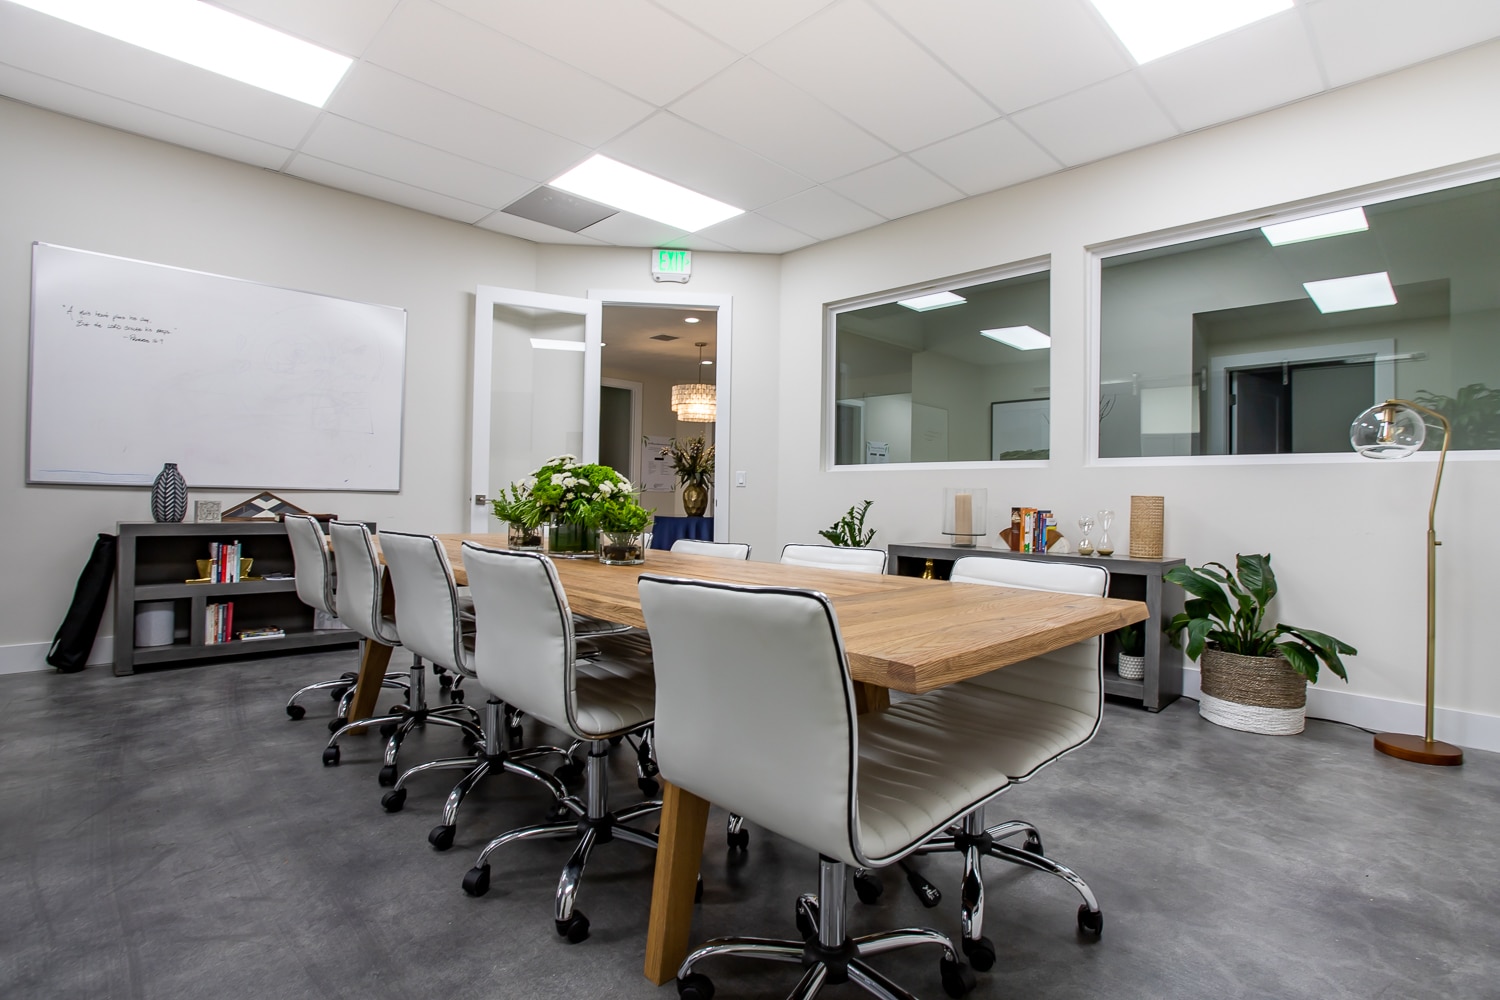 conference room in modern office space